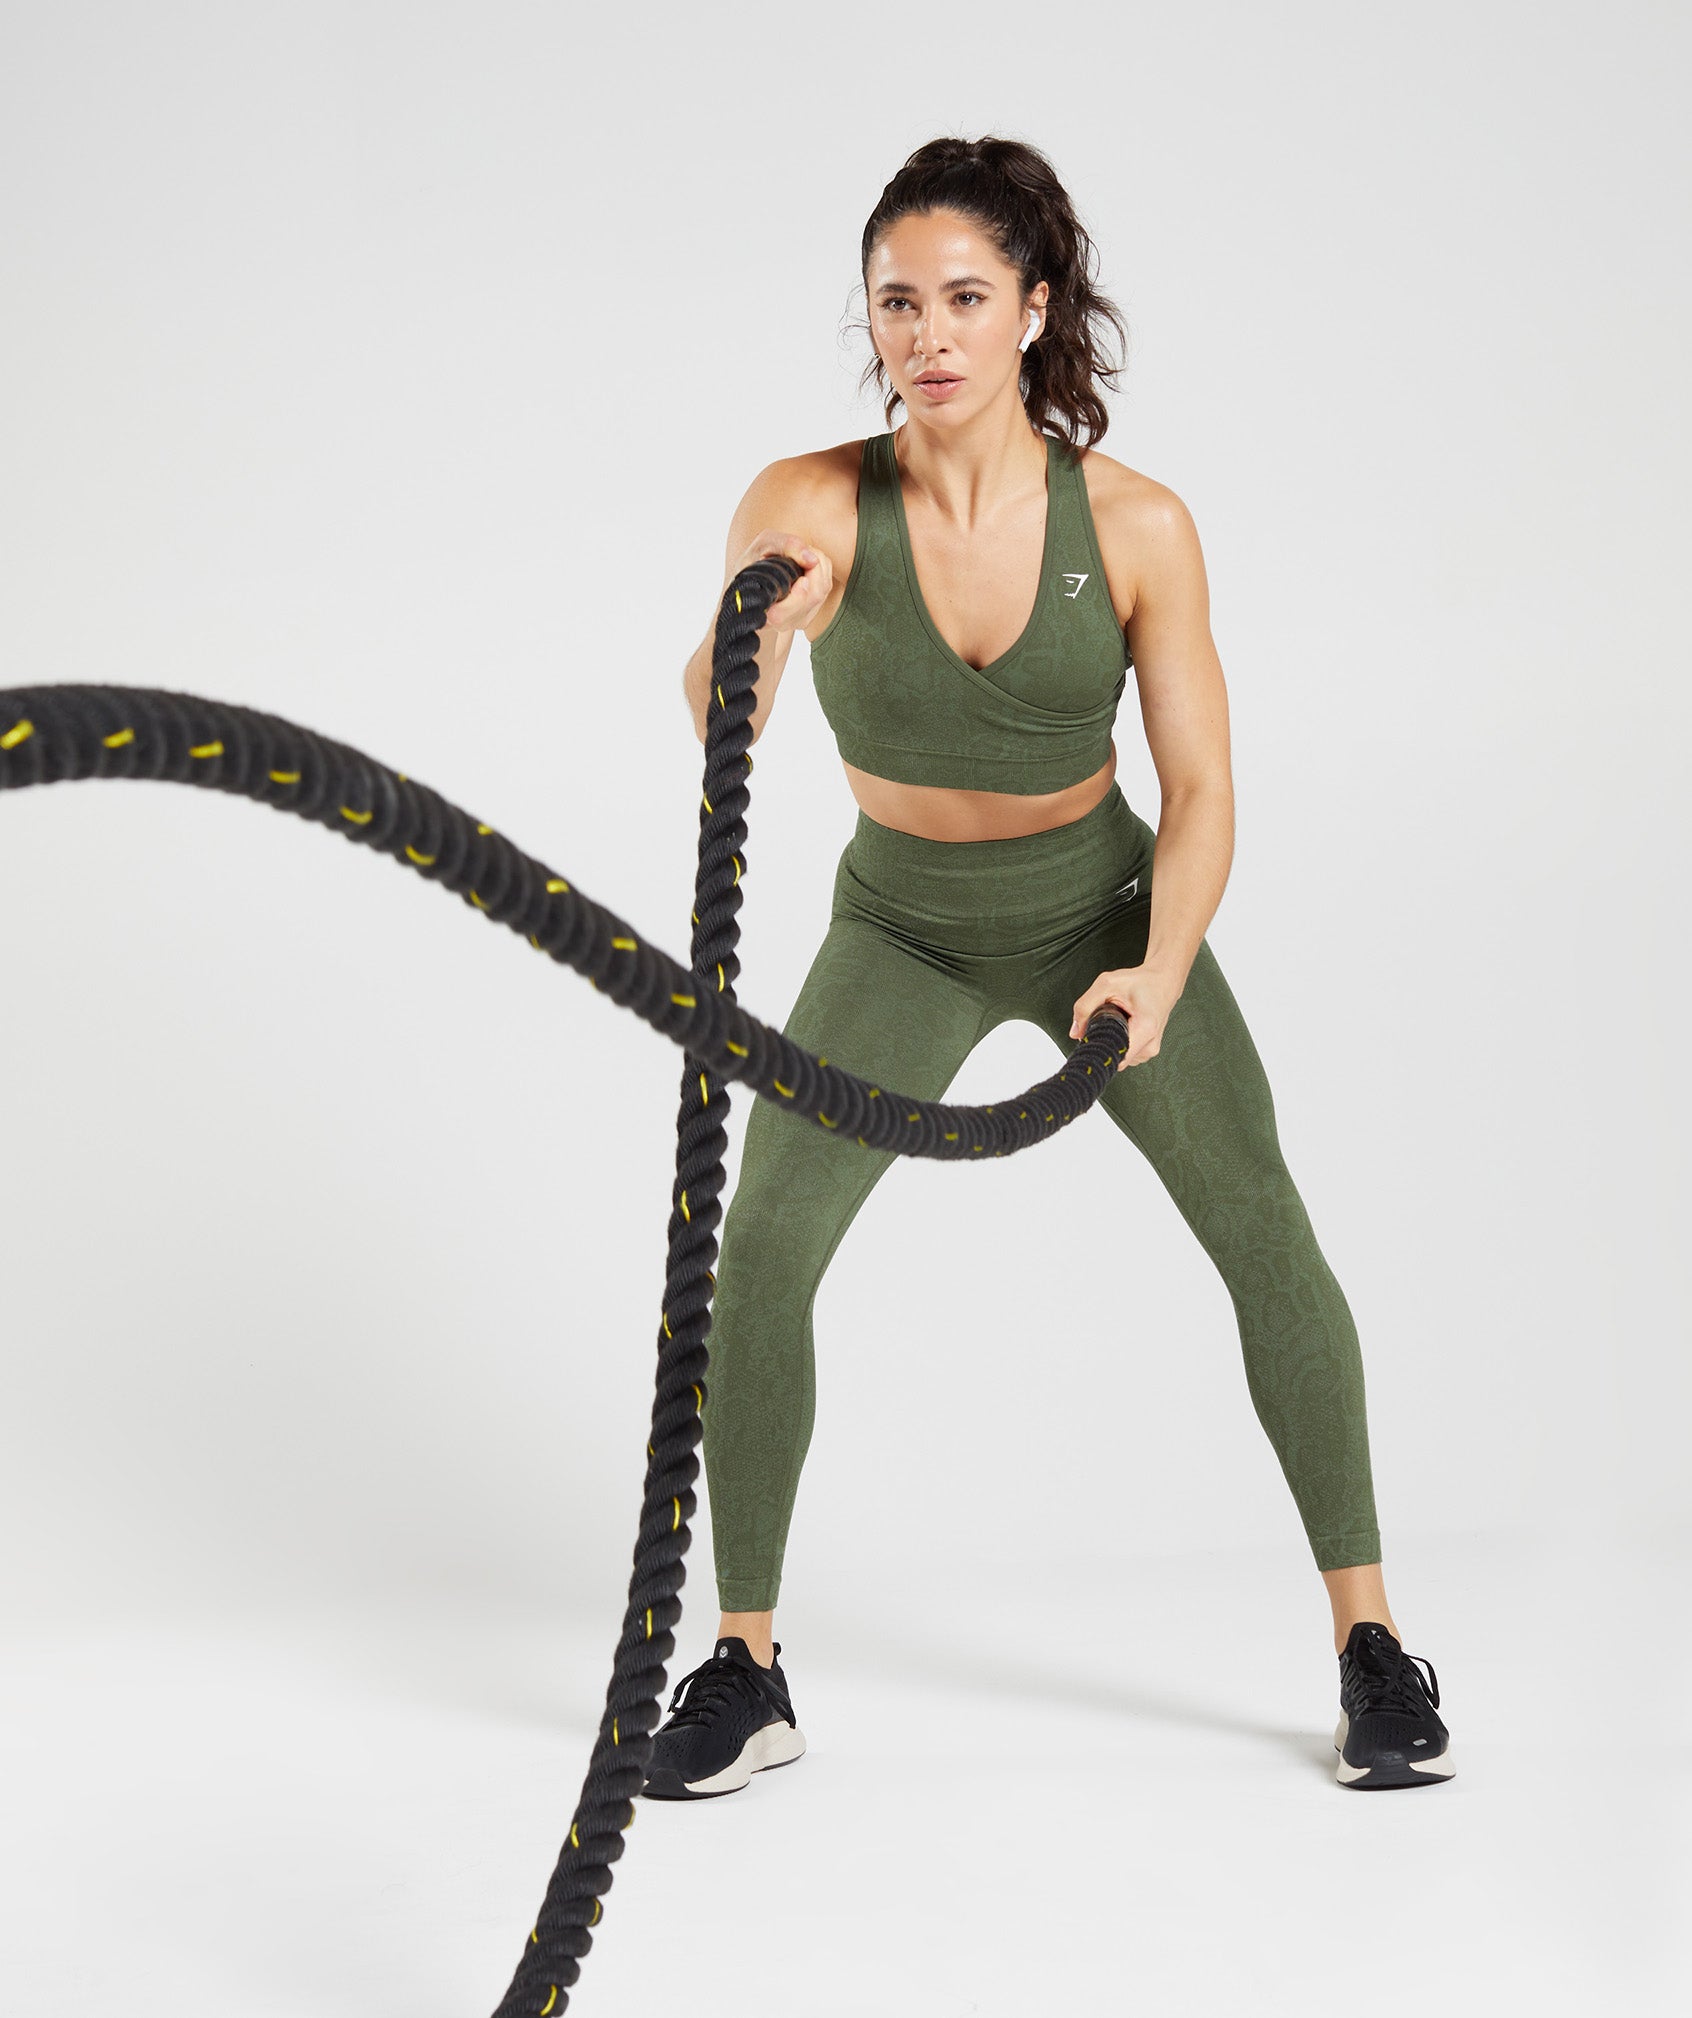 Adapt Animal Seamless Sports Bra in Willow Green/Core Olive